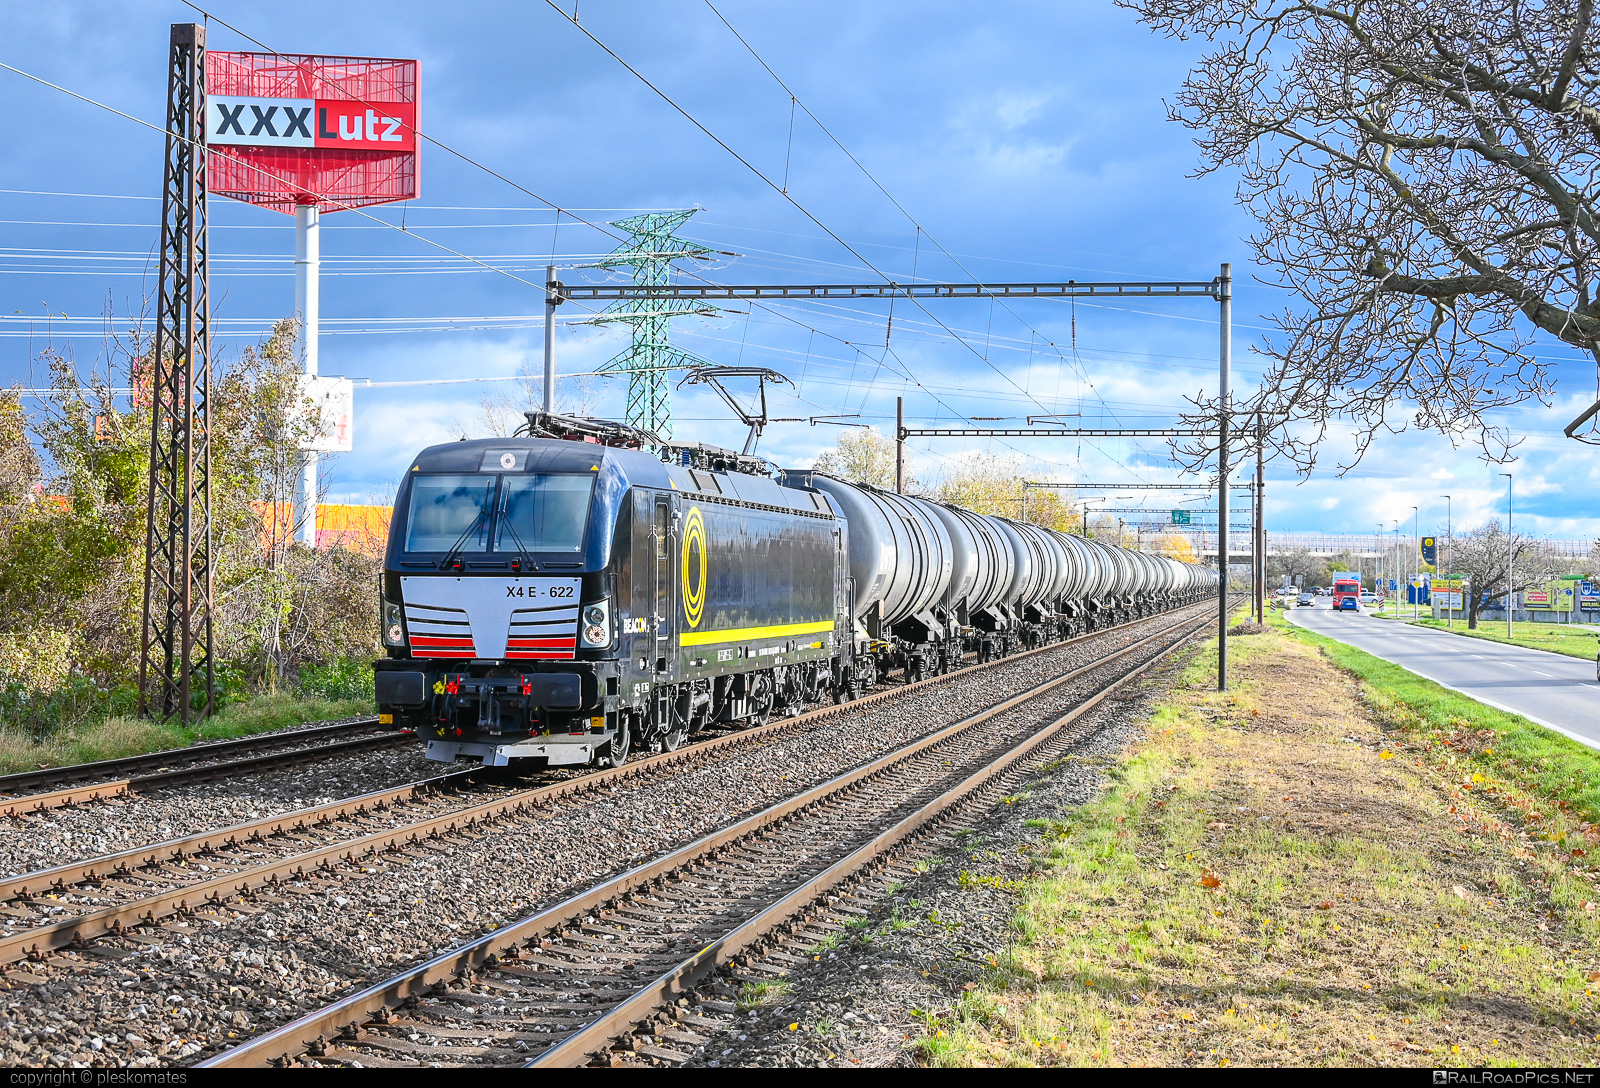 Siemens Vectron MS - 193 622-8 operated by LTE Logistik a Transport Slovakia, s.r.o. #beaconrailleasing #beaconrailleasinglimited #brll #kesselwagen #lte #siemens #siemensVectron #siemensVectronMS #tankwagon #vectron #vectronMS